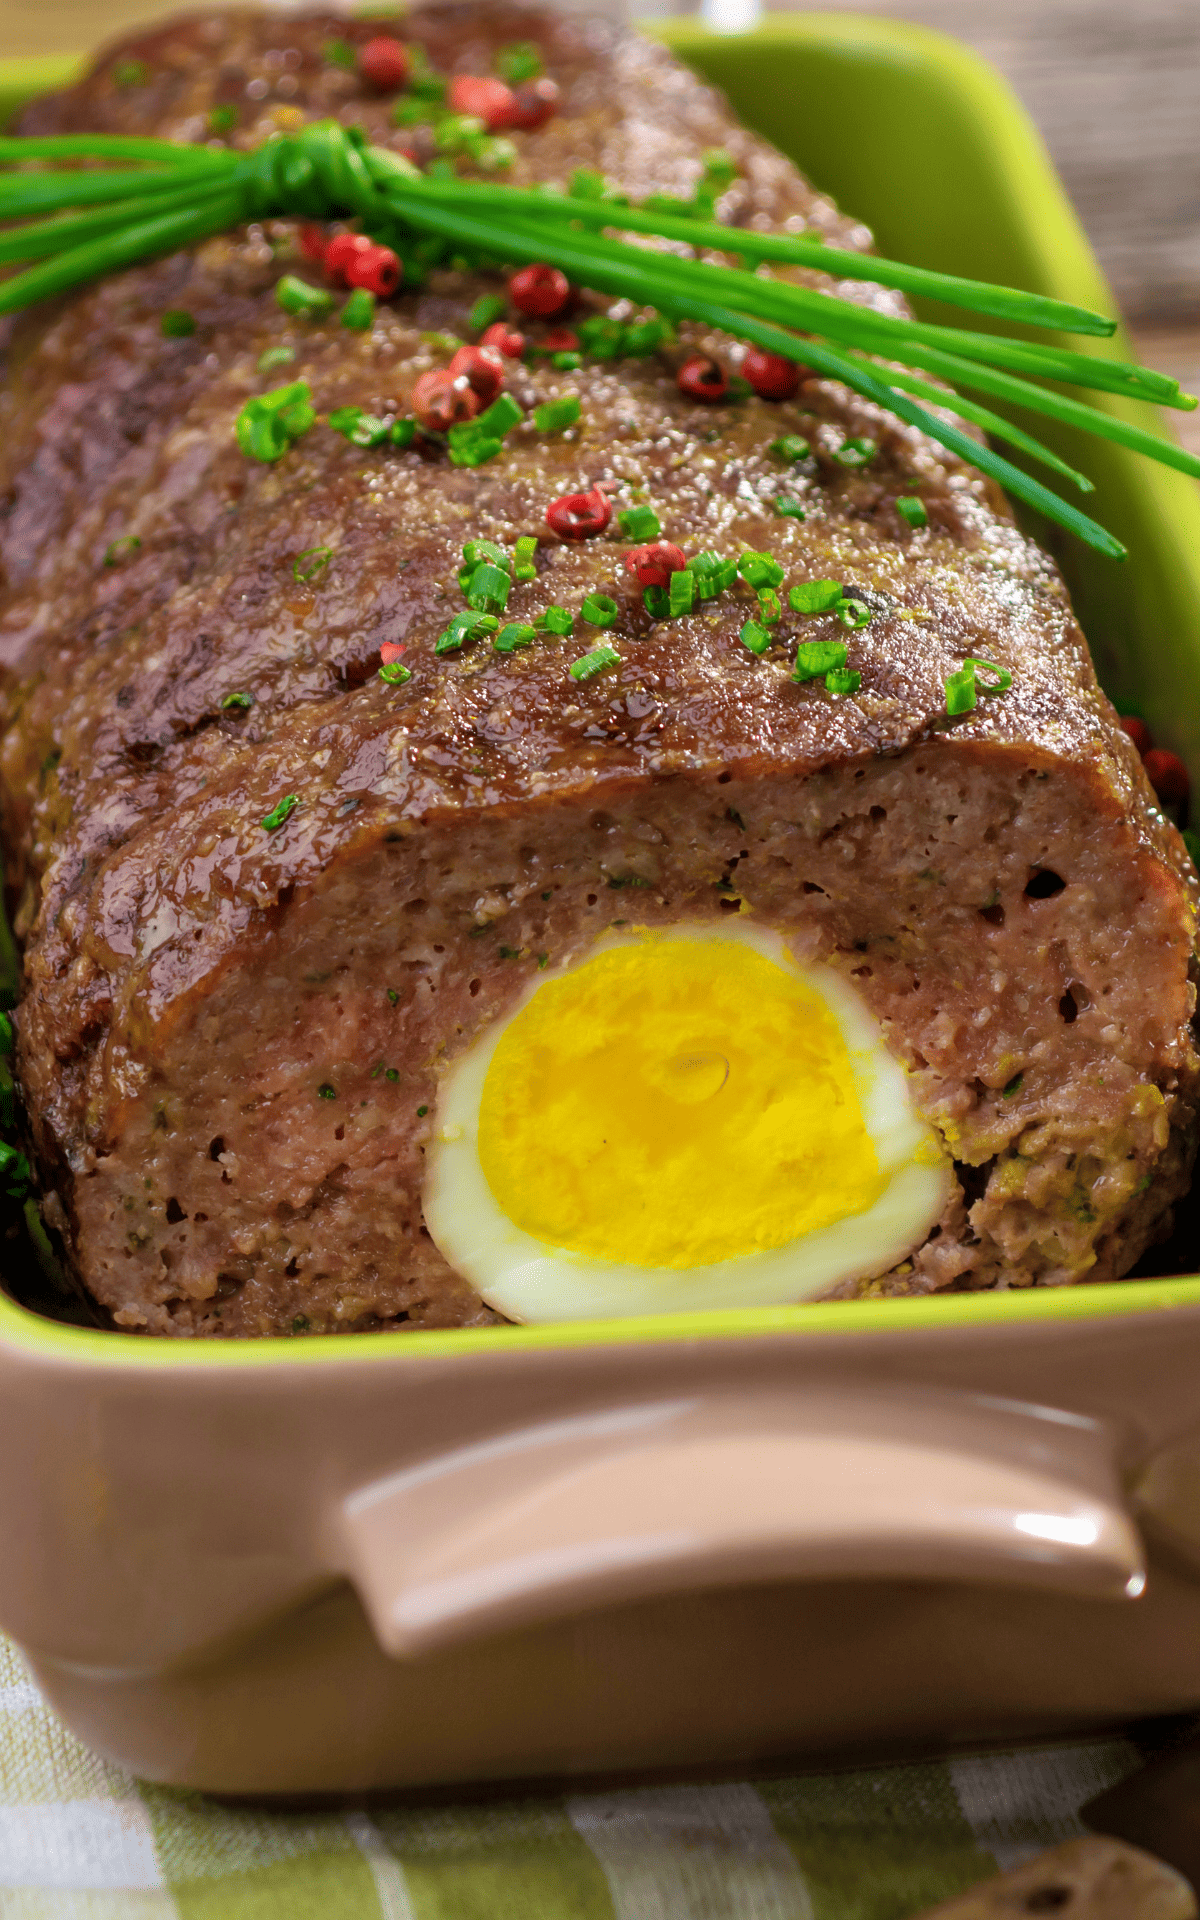 meatloaf with boiled egg ina frontal close up.